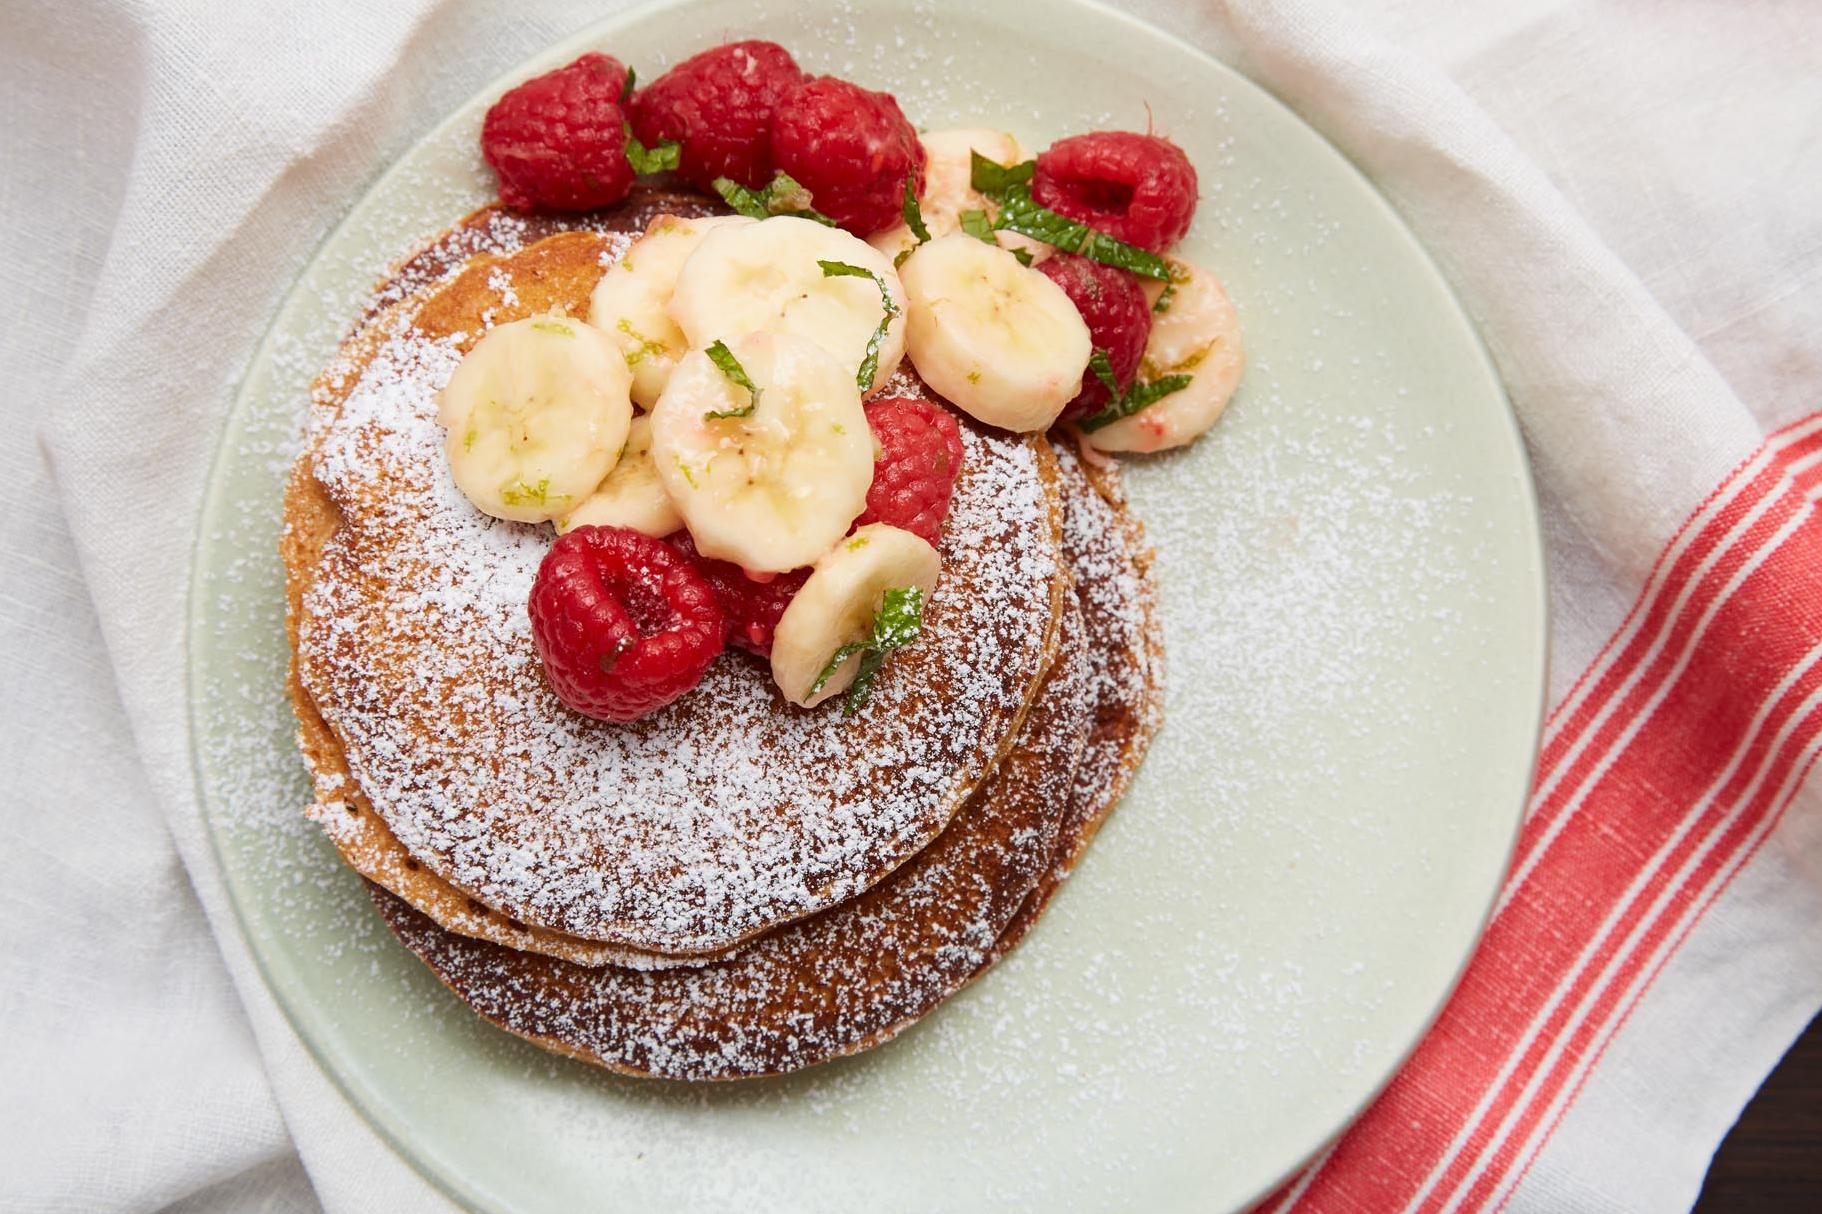  Satisfy your sweet tooth cravings with these dreamy pancakes